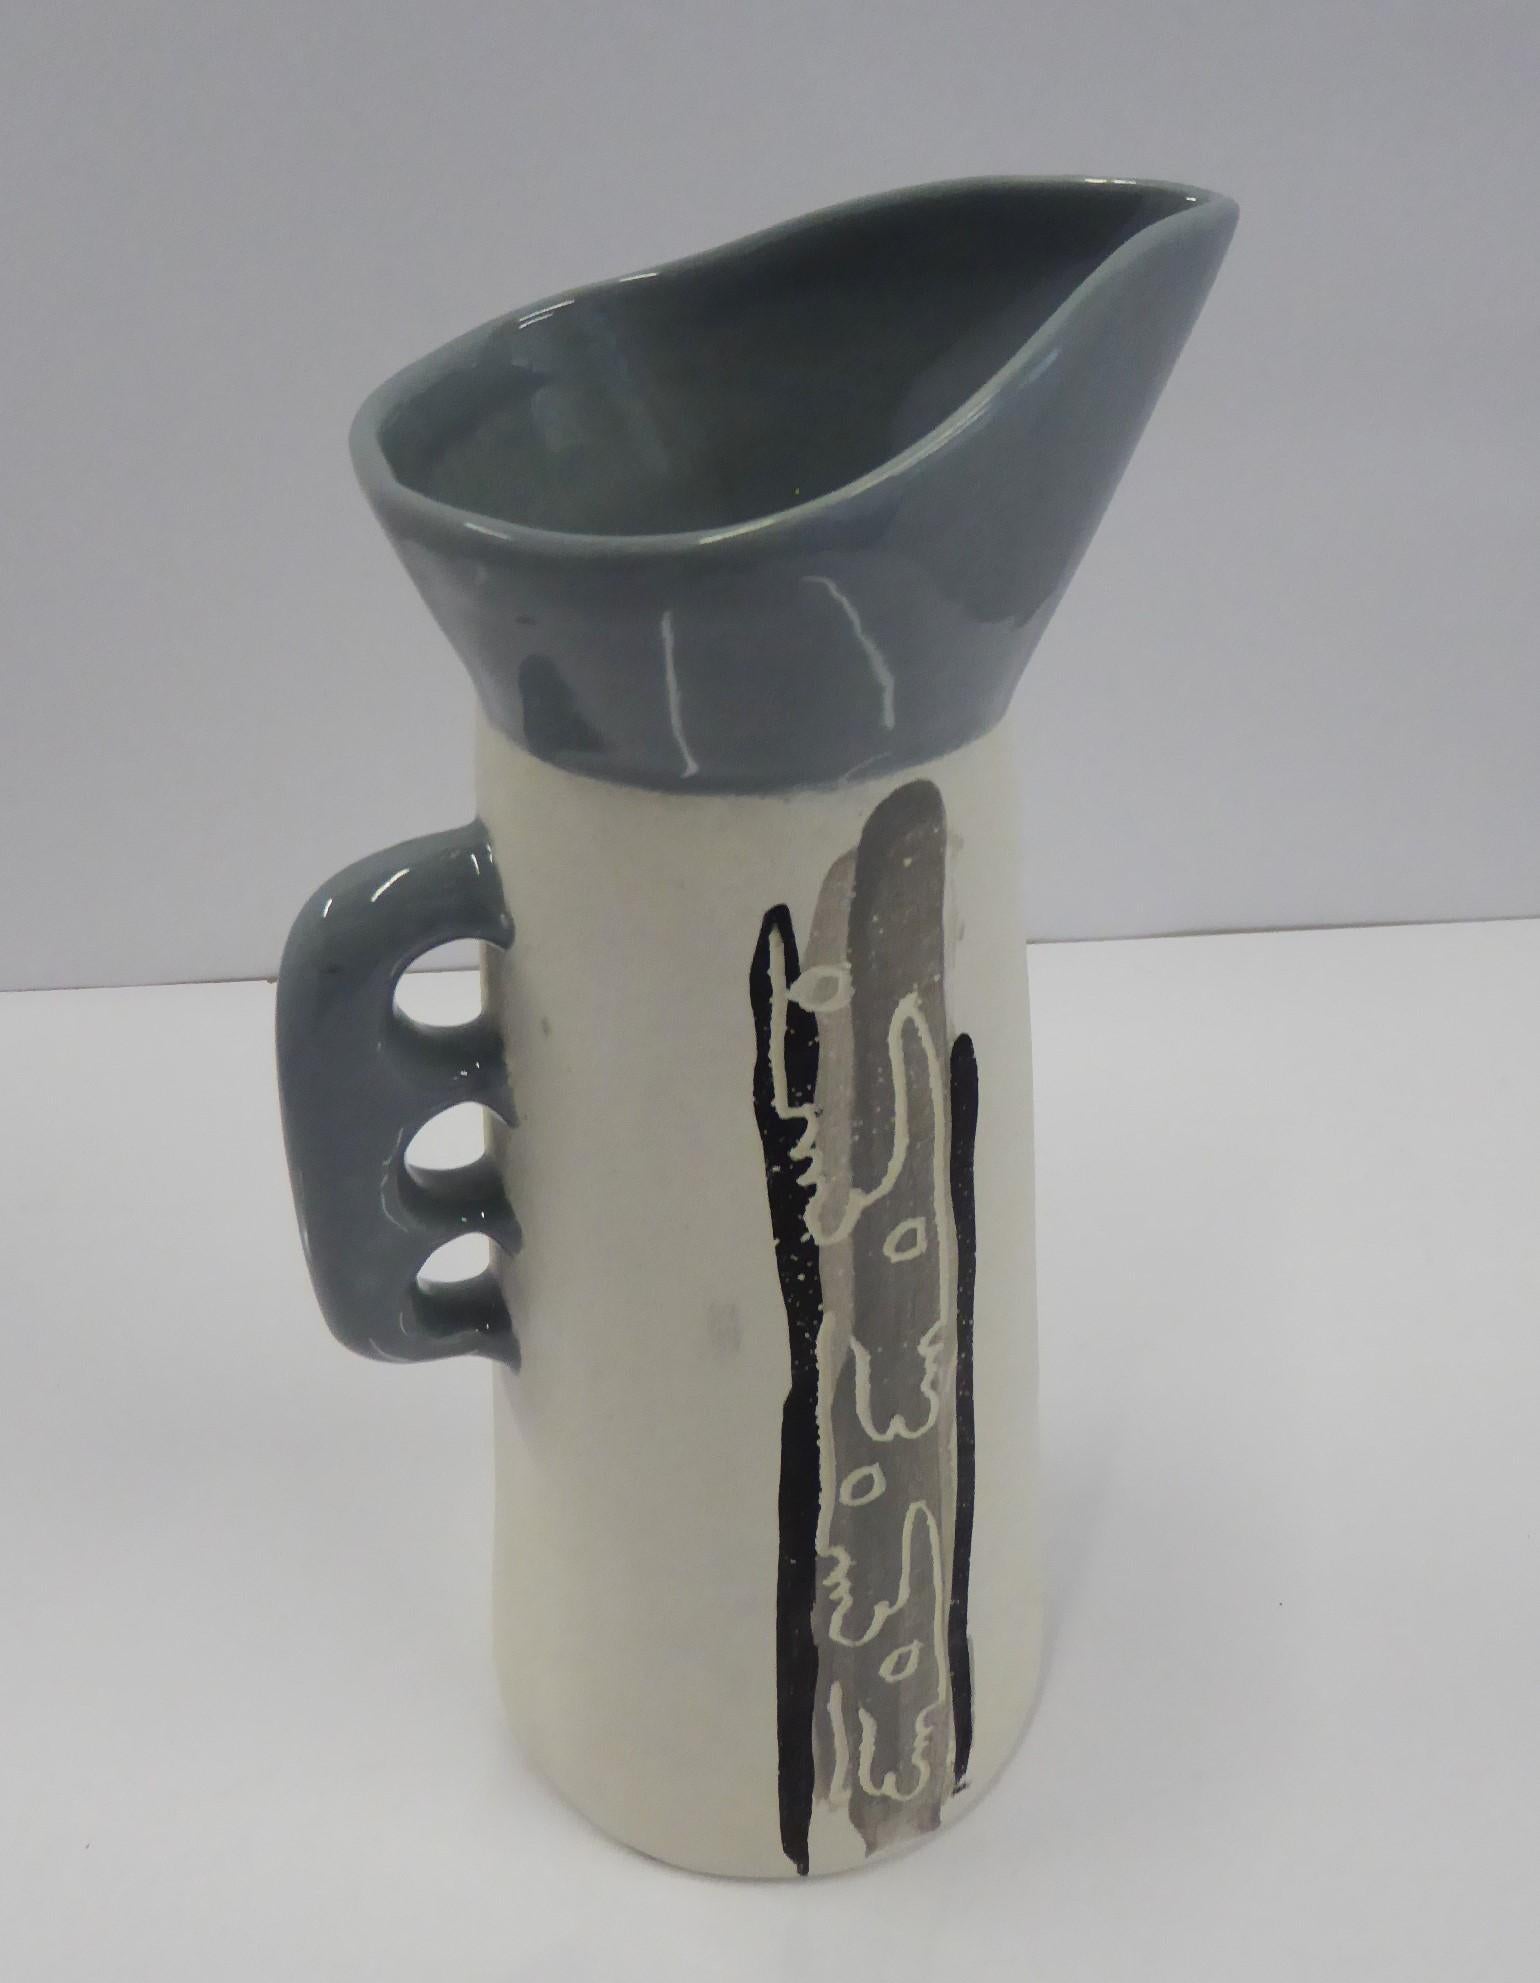 Chalice Pottery California Mid-Century Modern Tall Sculptural Ceramic Pitcher 1